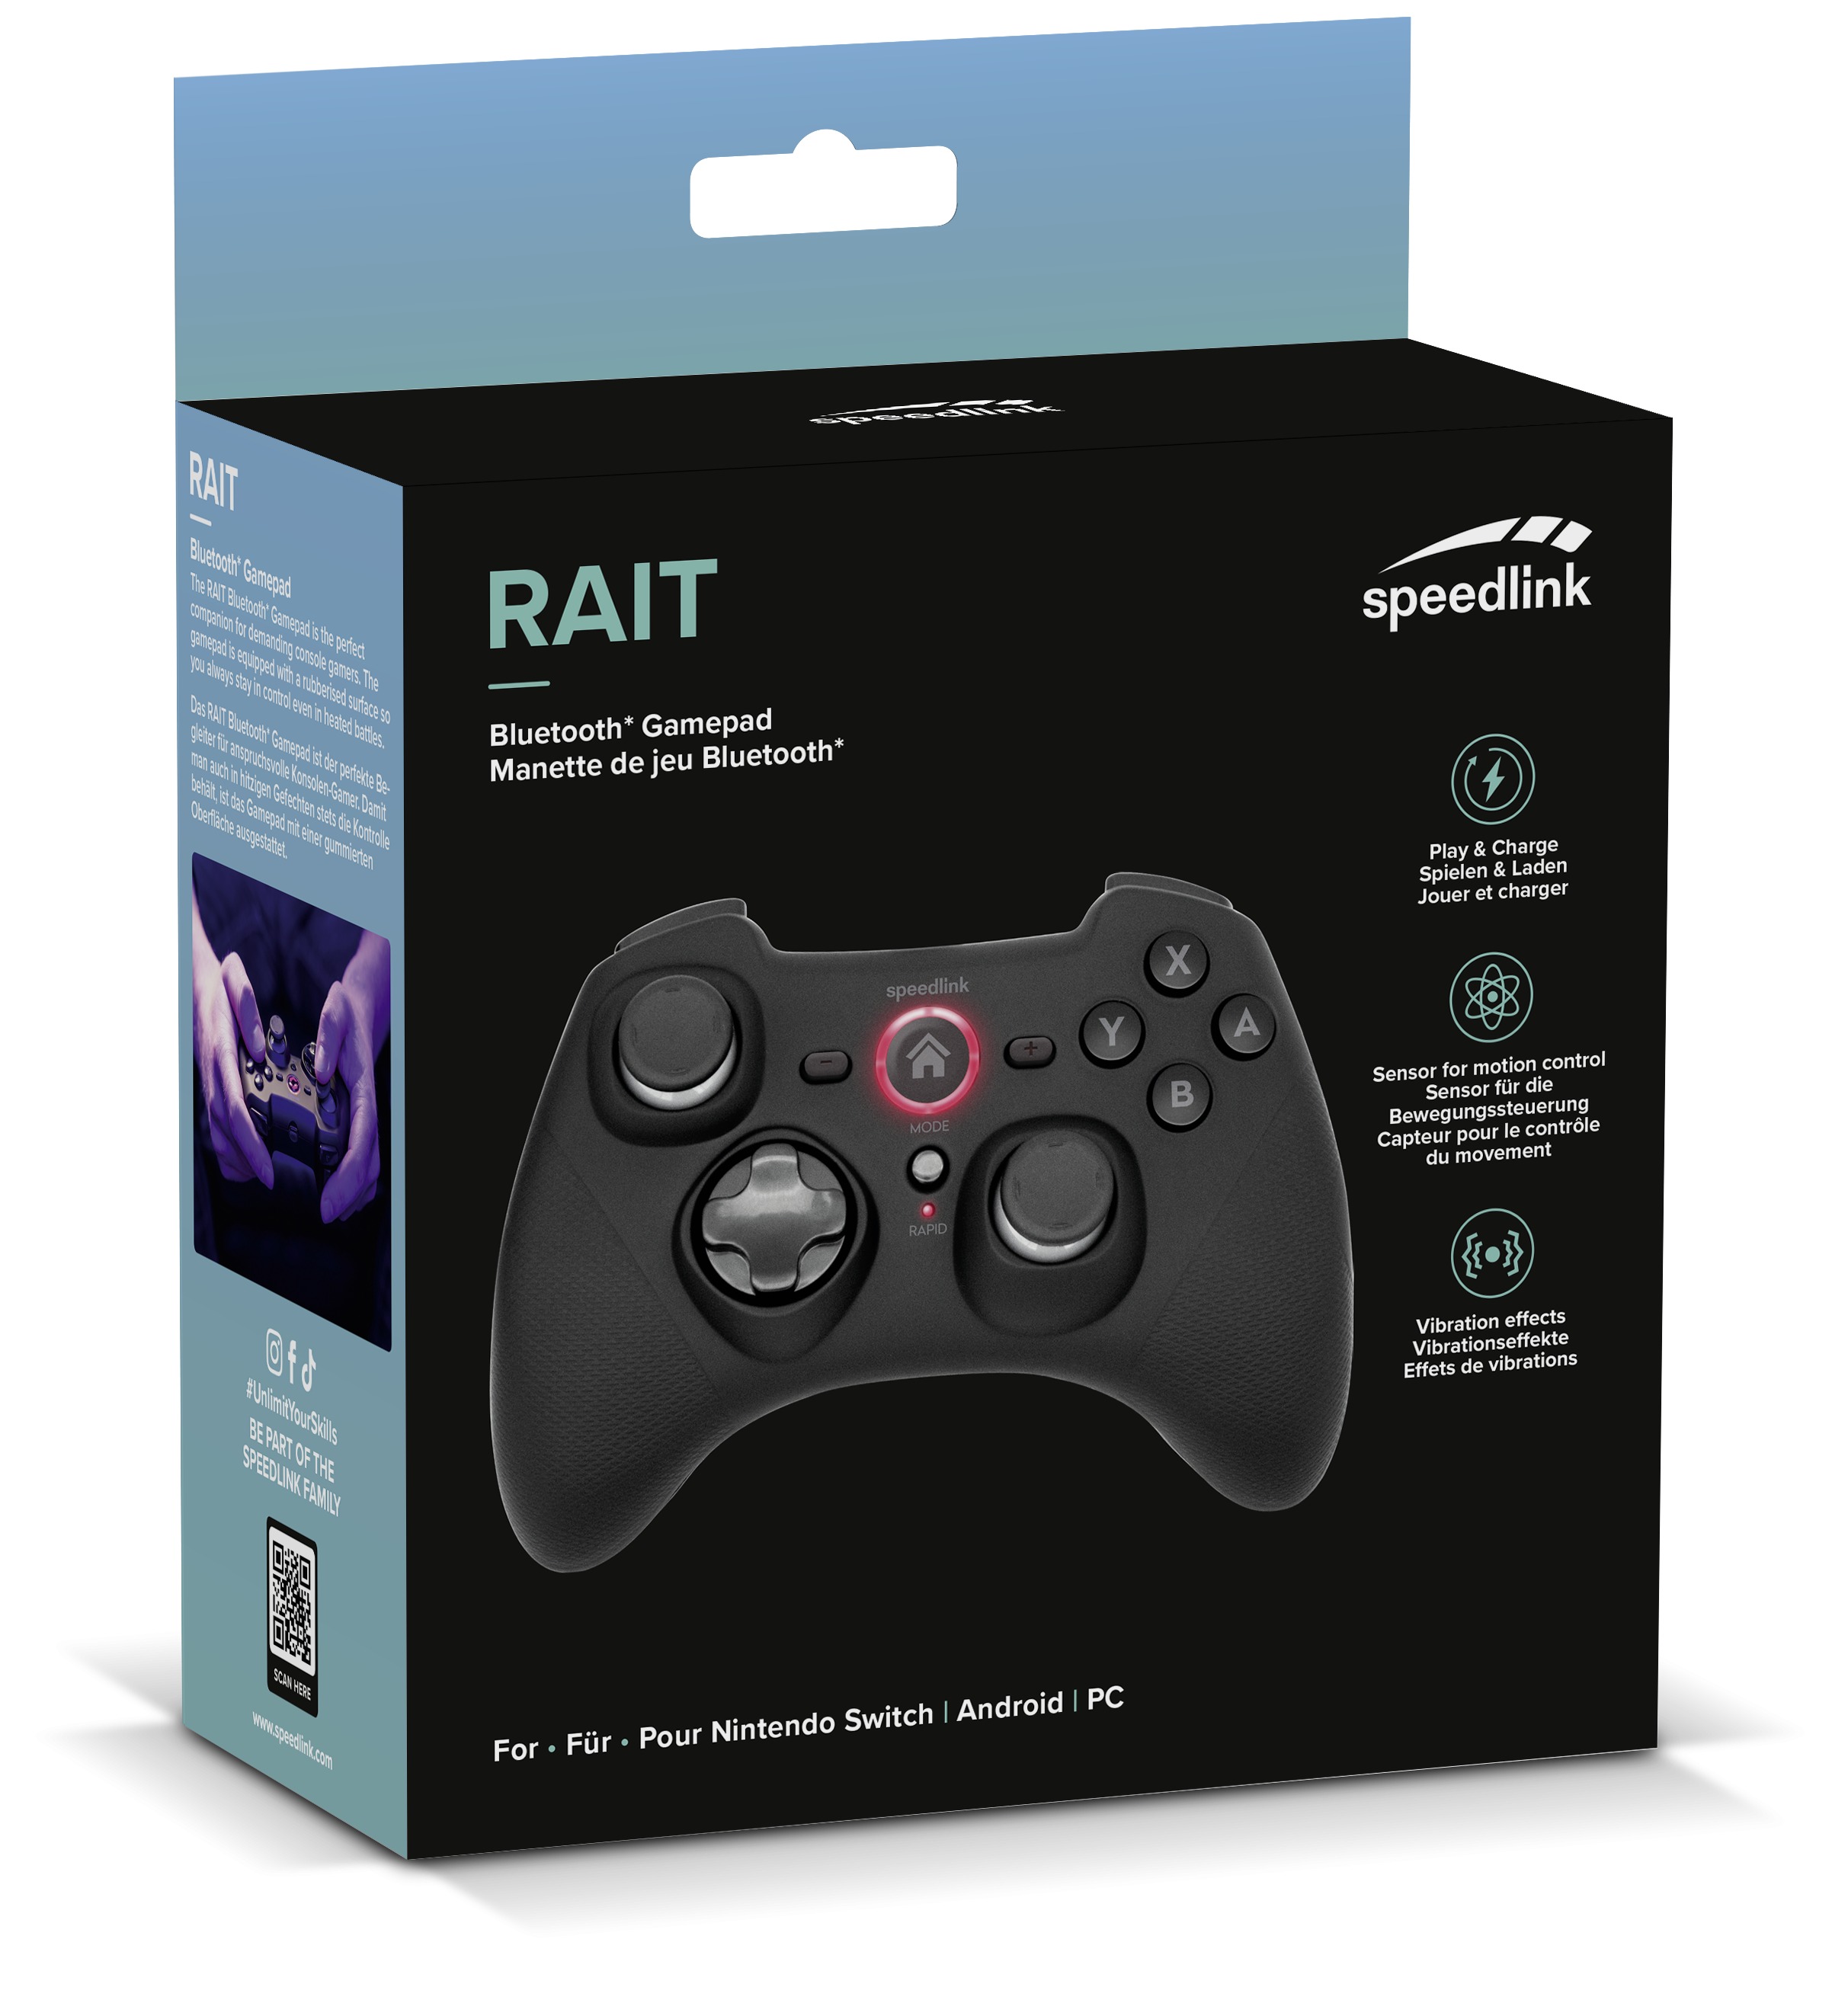 RAIT Bluetooth Gamepad - rubber-black Nintendo for SL-330402-RRBK | Switch/OLED/PC/Android